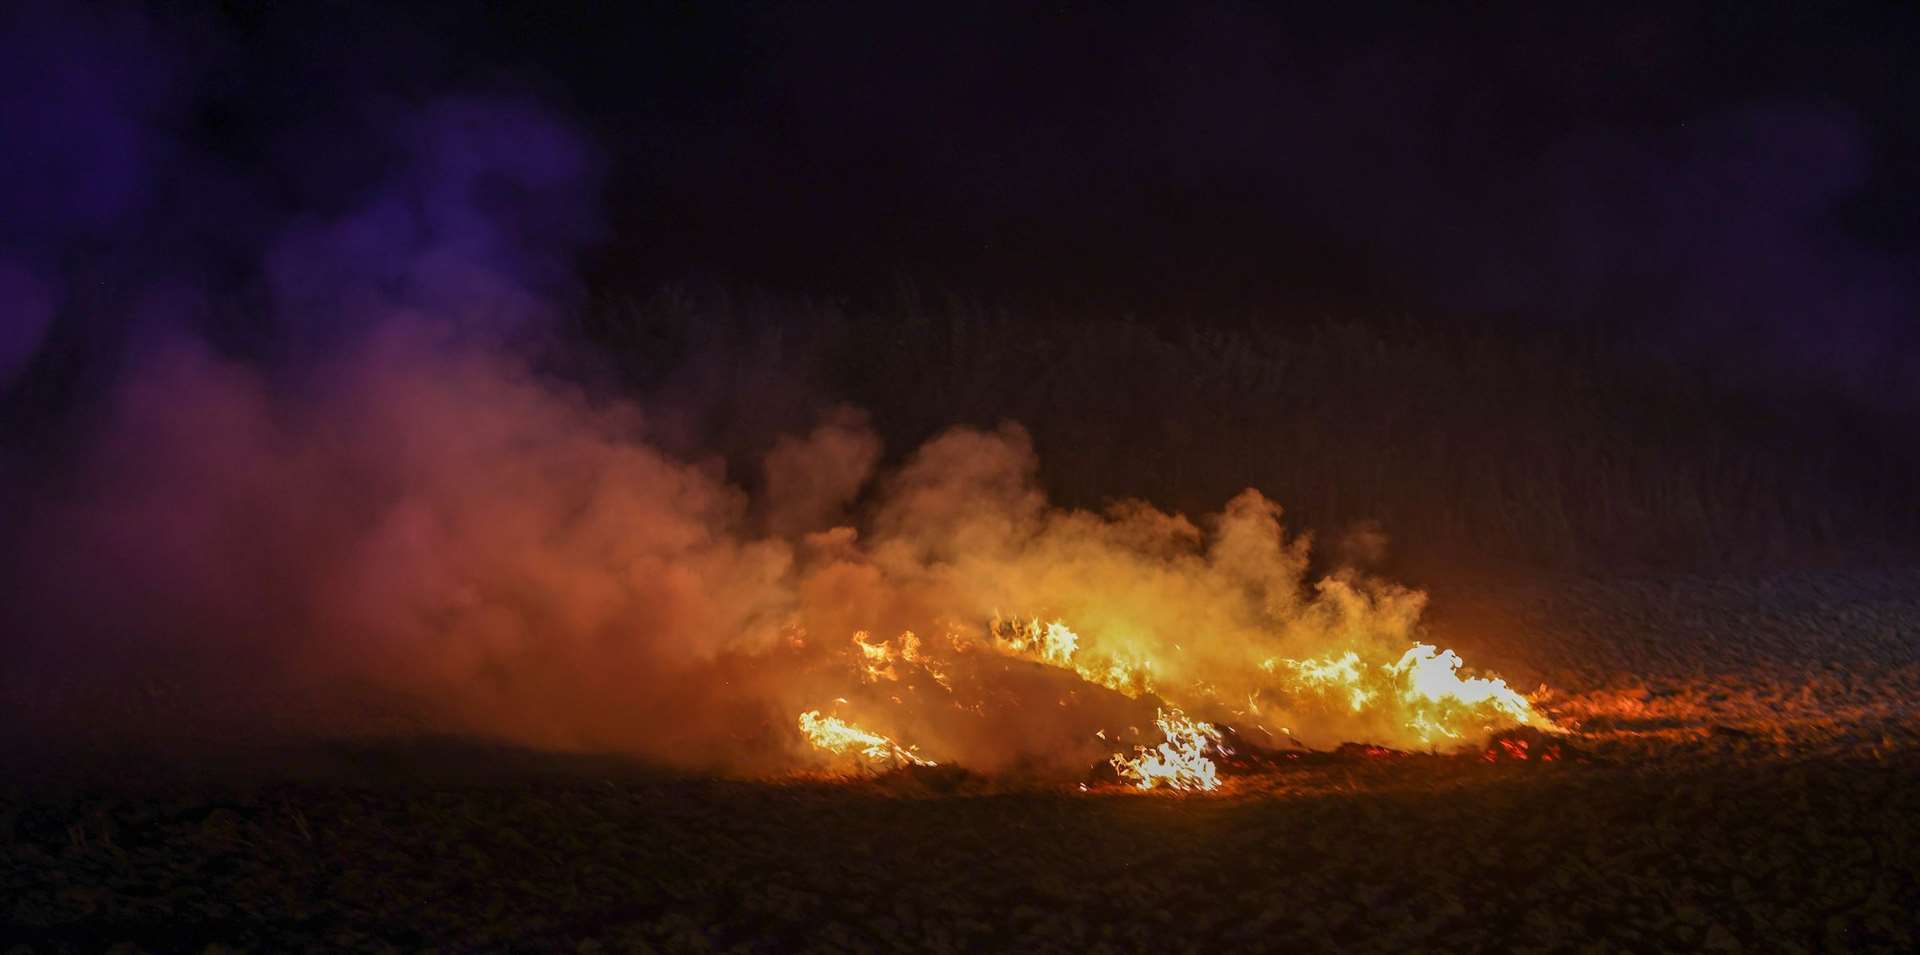 The blaze ripped through 50 bales of hay. Picture: UKNIP